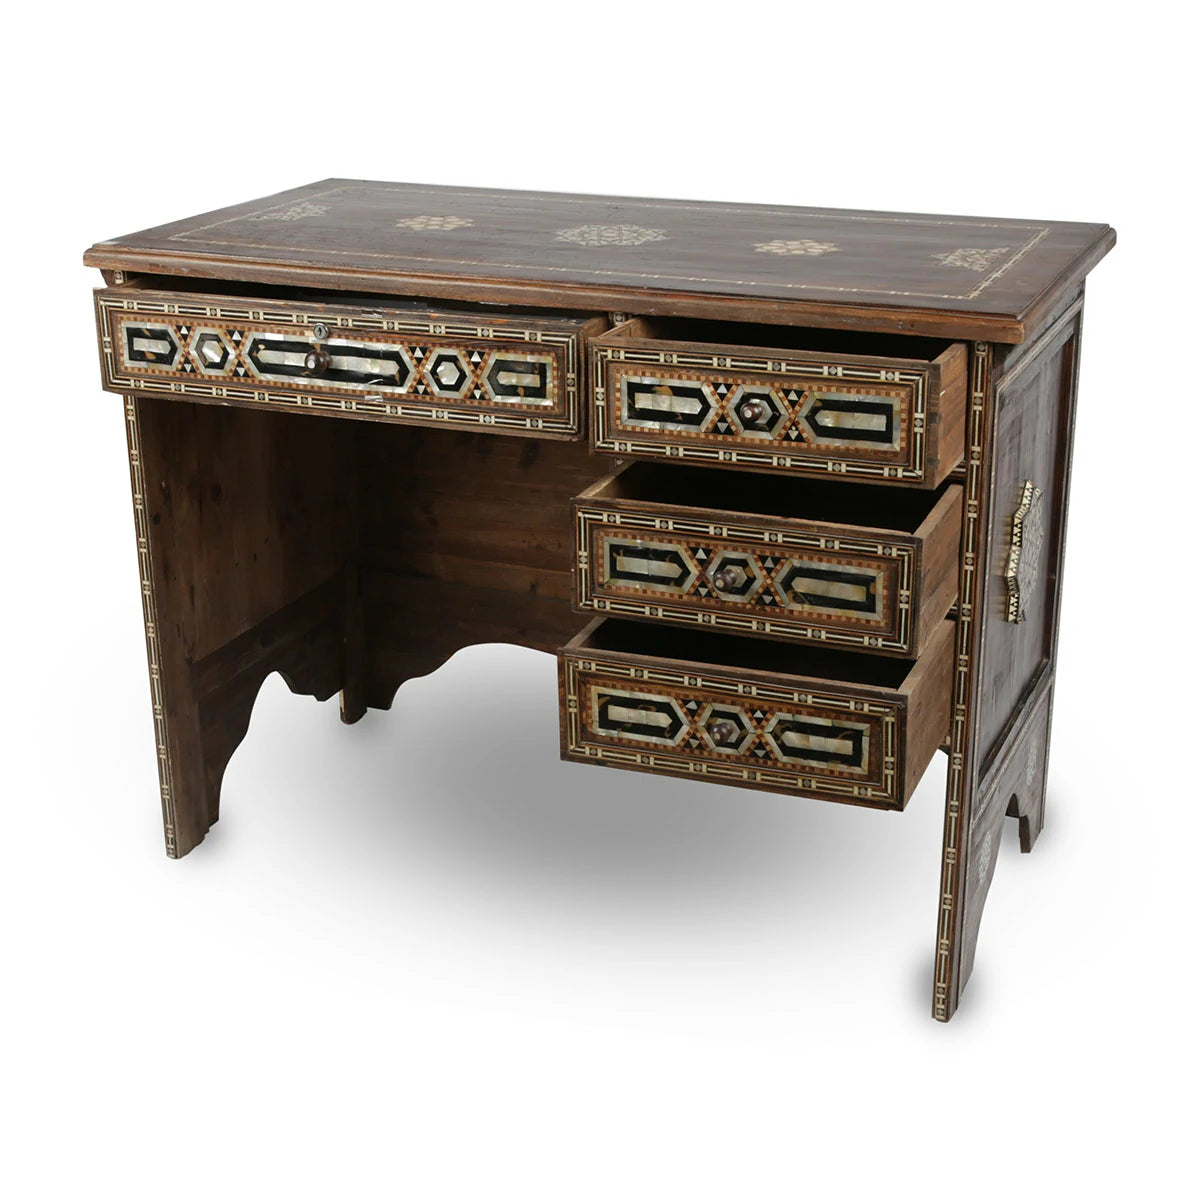 Cross Angle View of Arabian Calligraphic Design Desk with Open Drawers